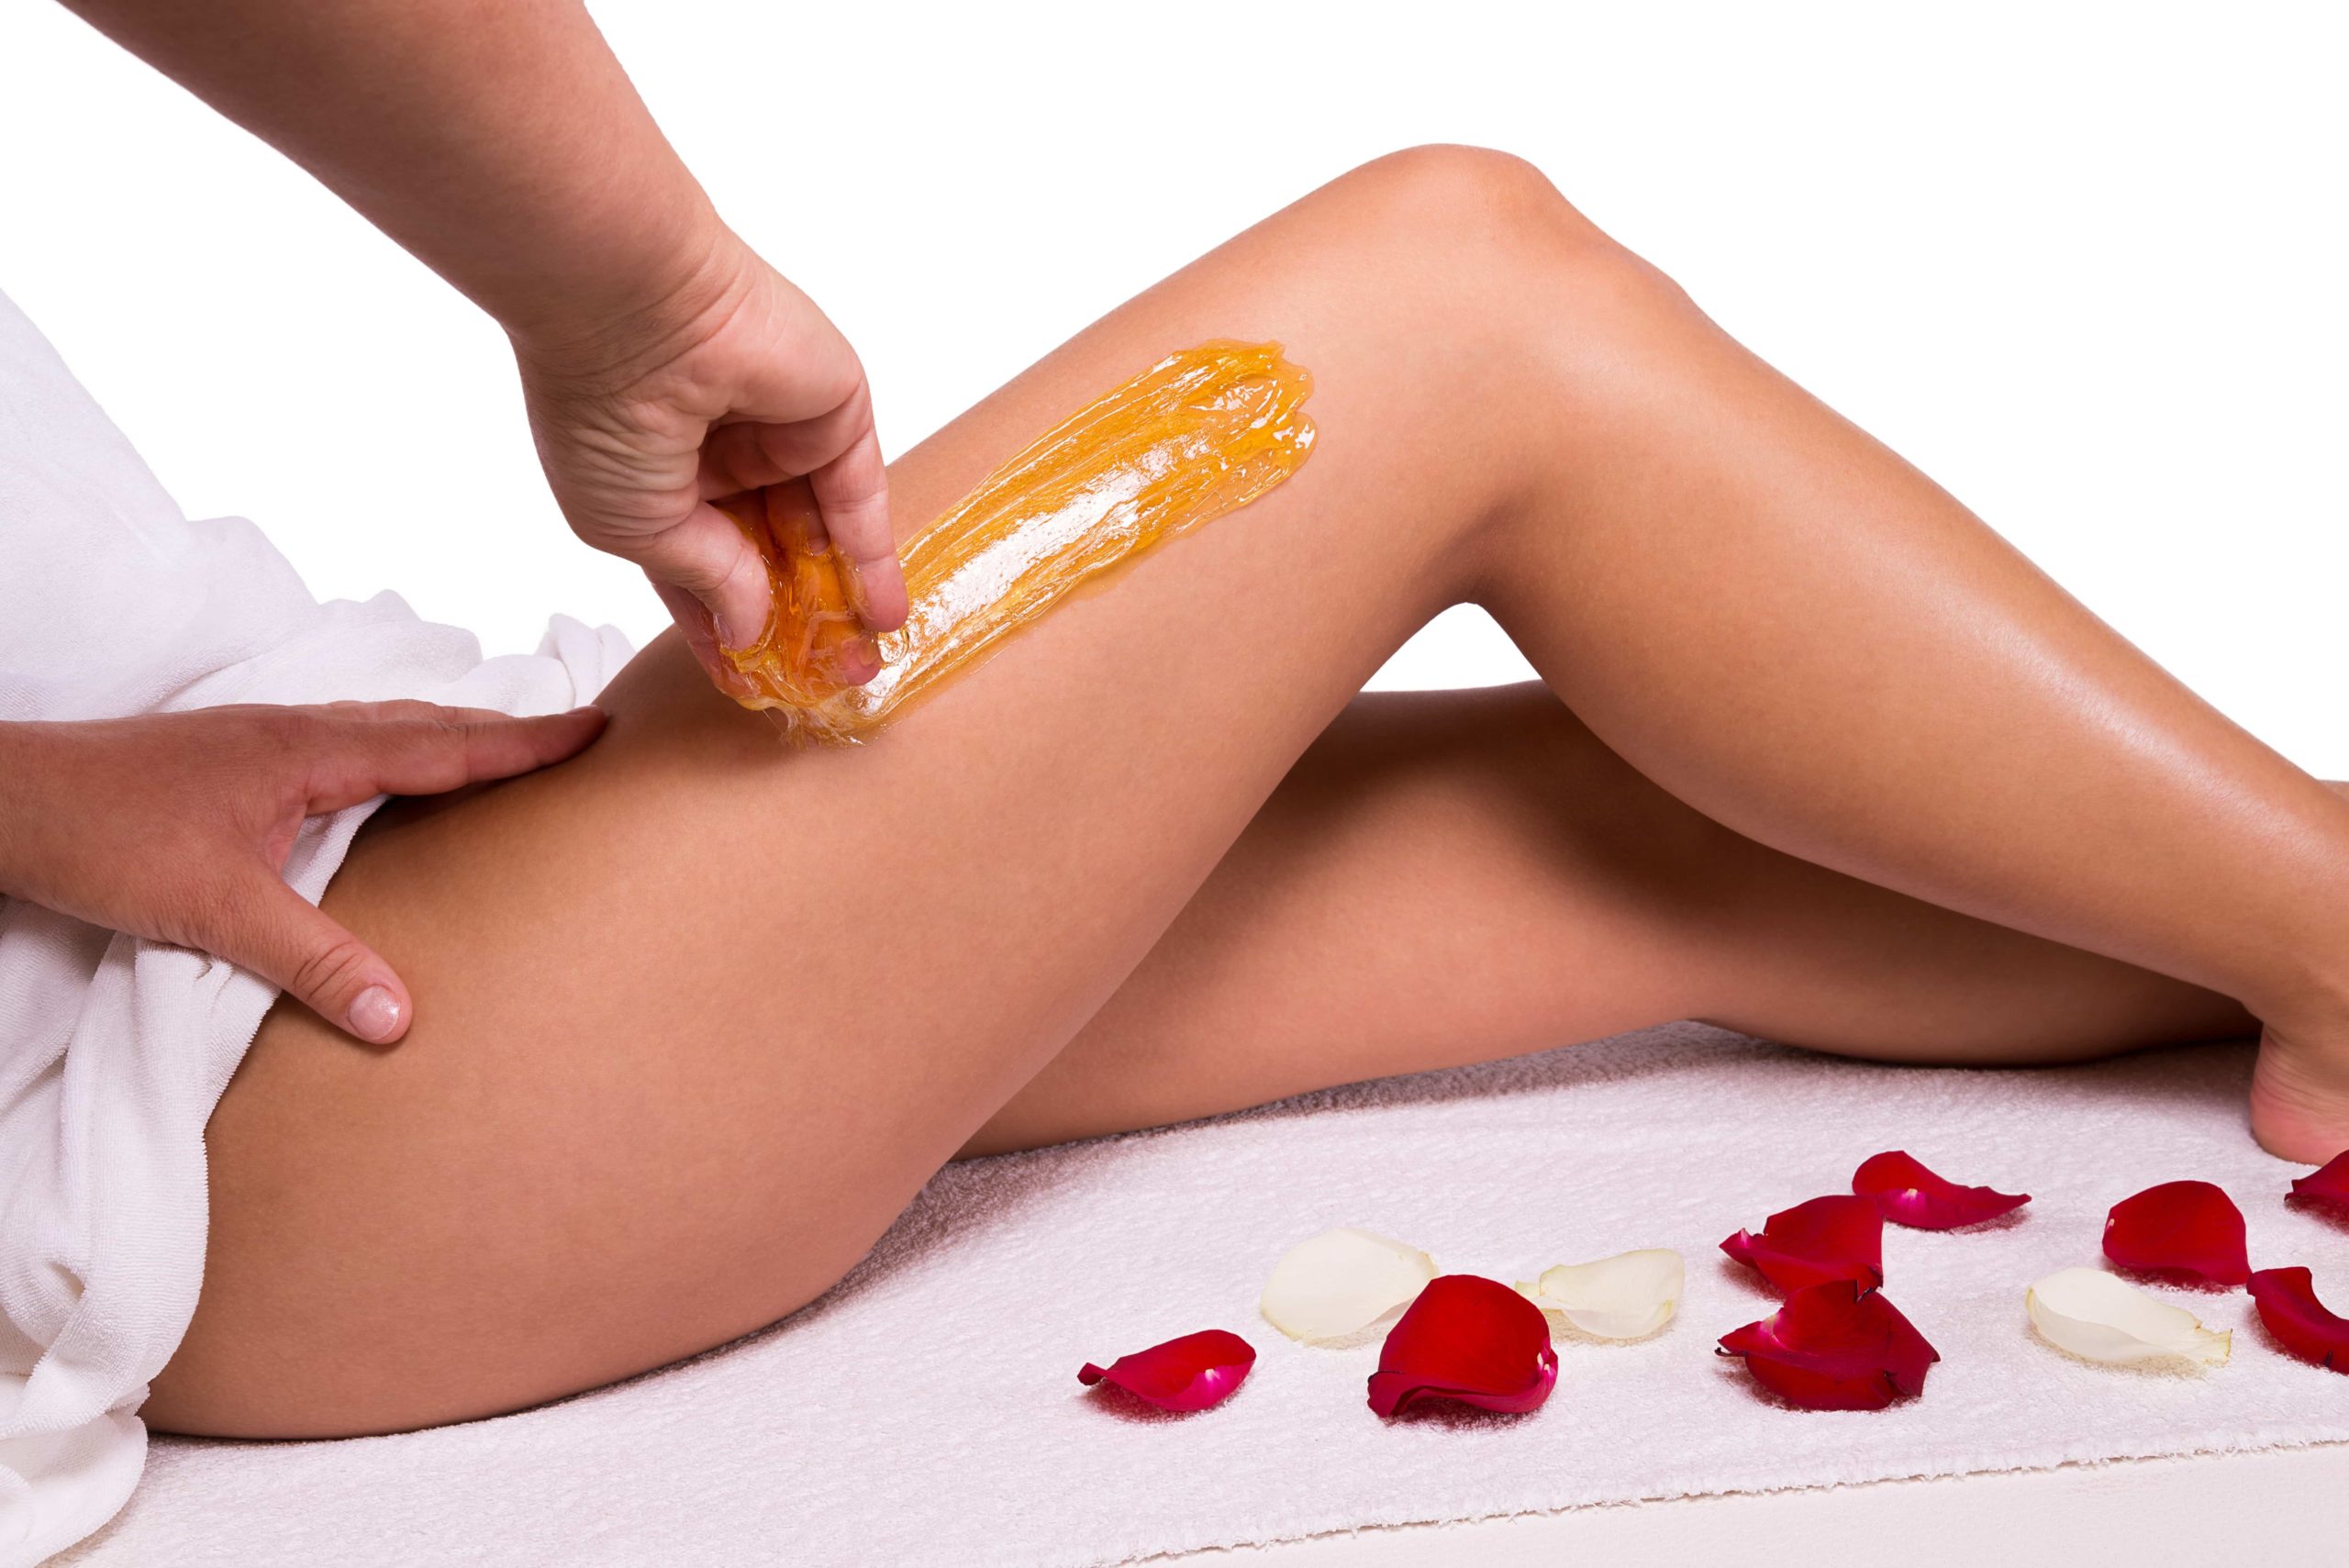 The Dos and Don'ts of Waxing Tips for a Safe and Effective Experience